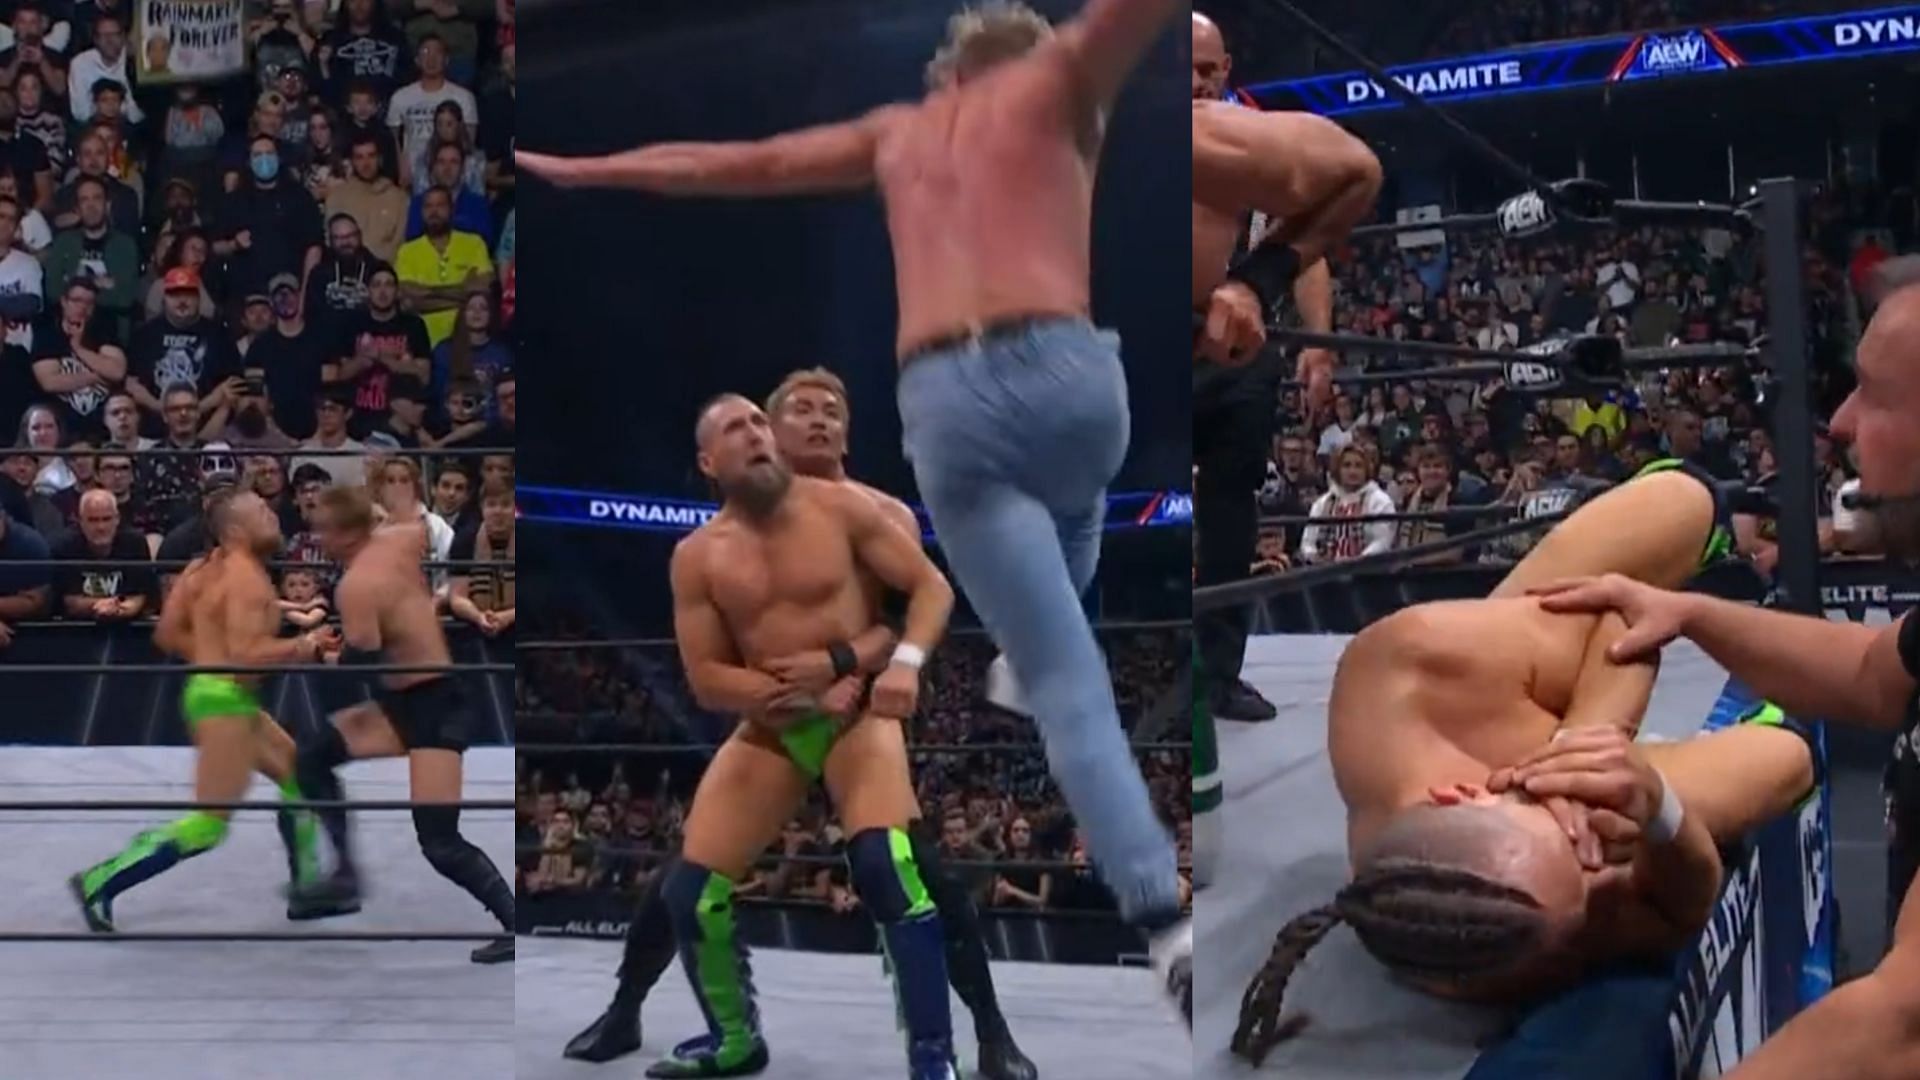 Bryan Danielson suffered an injury during the main event of AEW Dynamite